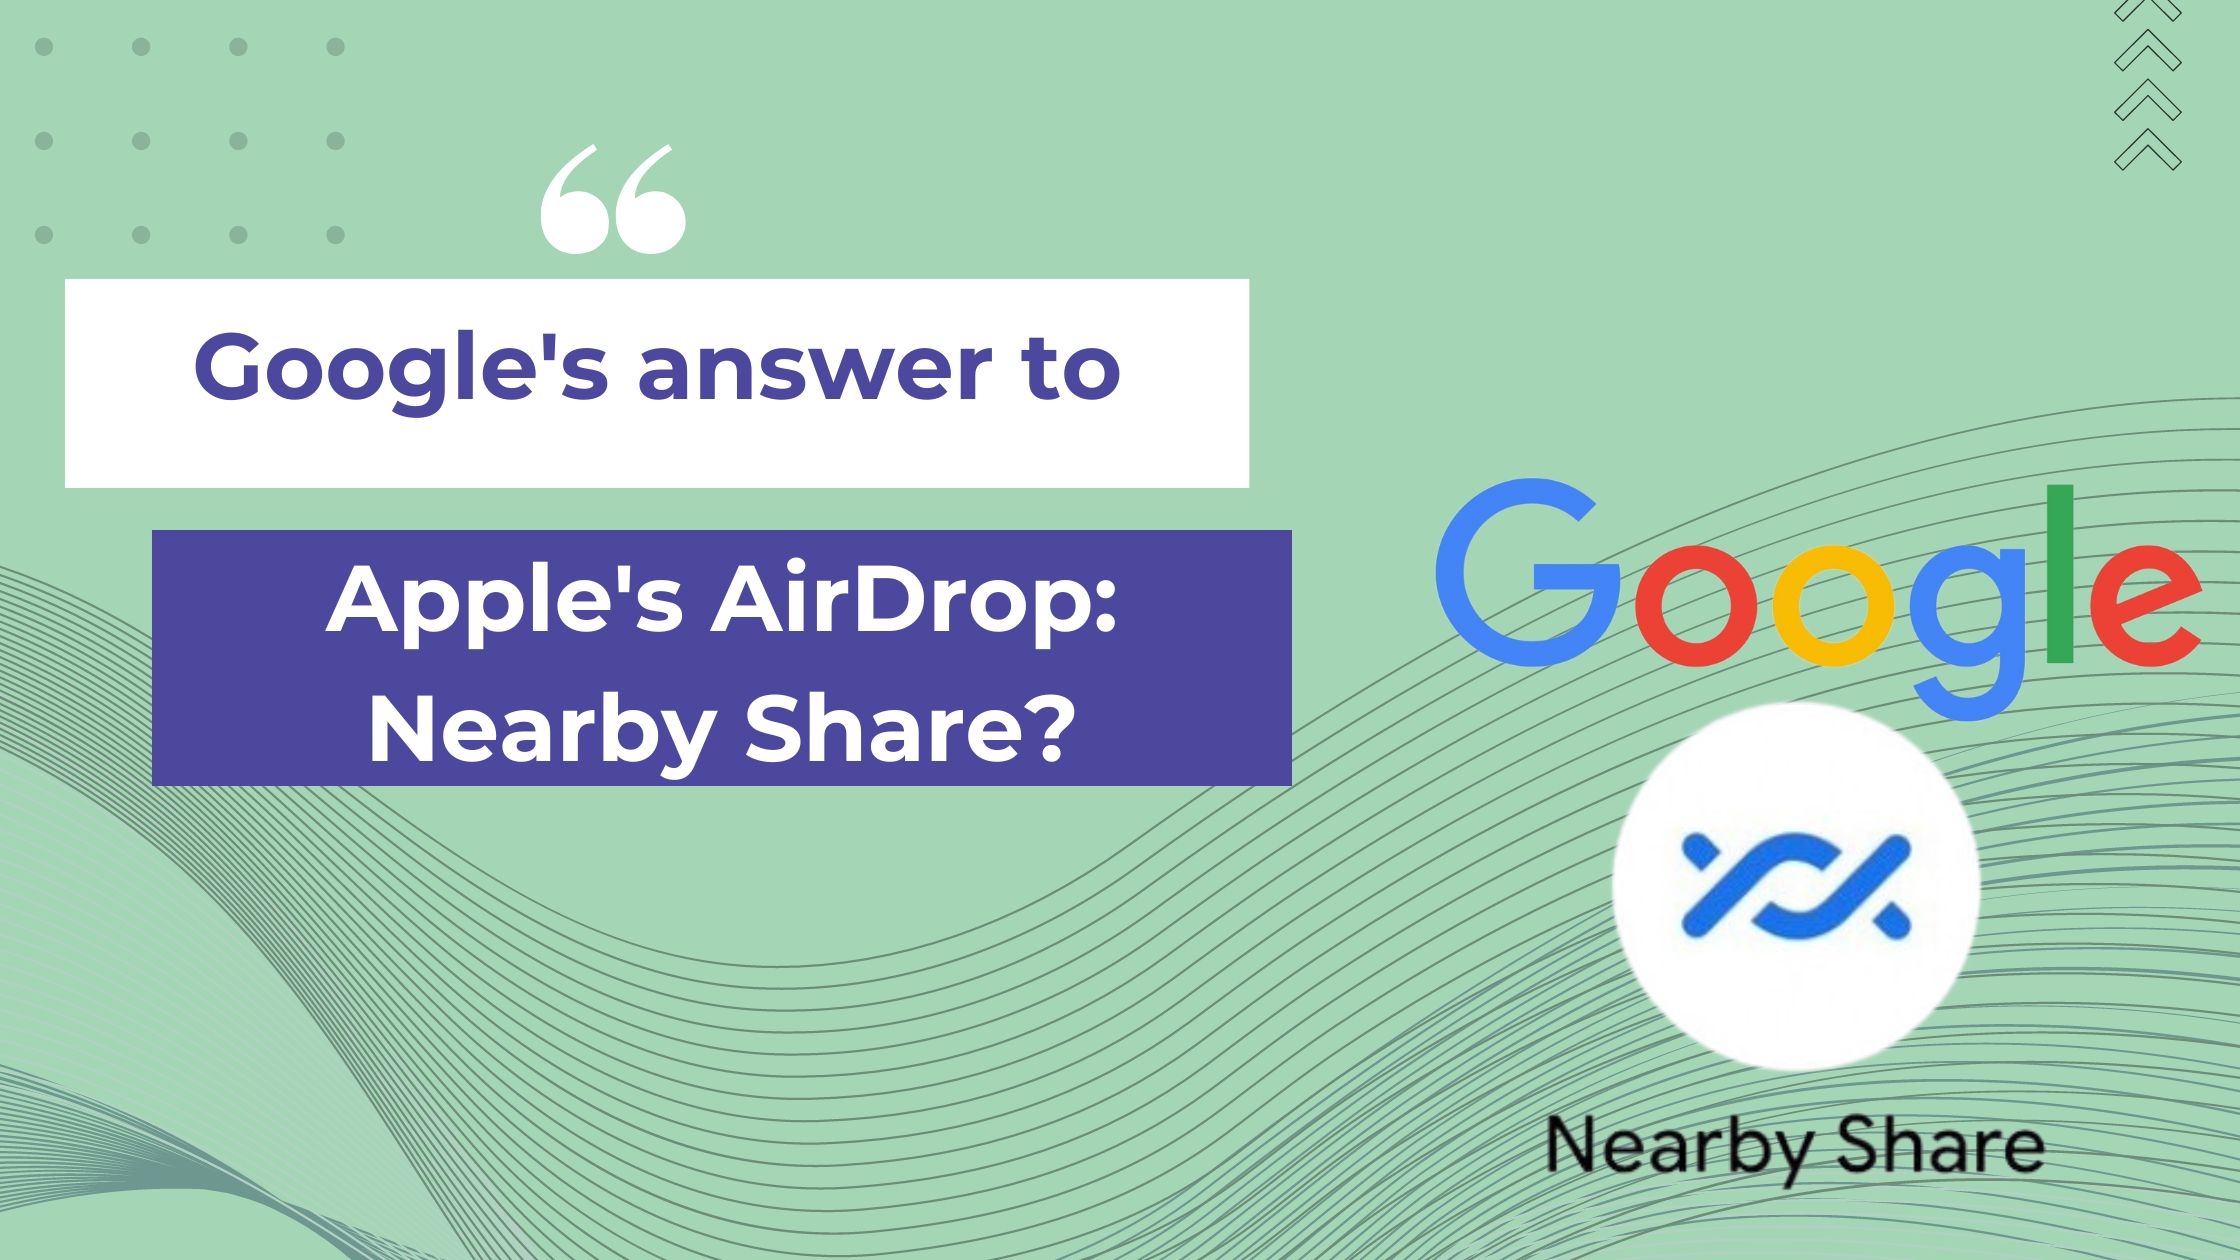 Google’s answer to Apple’s Airdrop: Nearby Share?